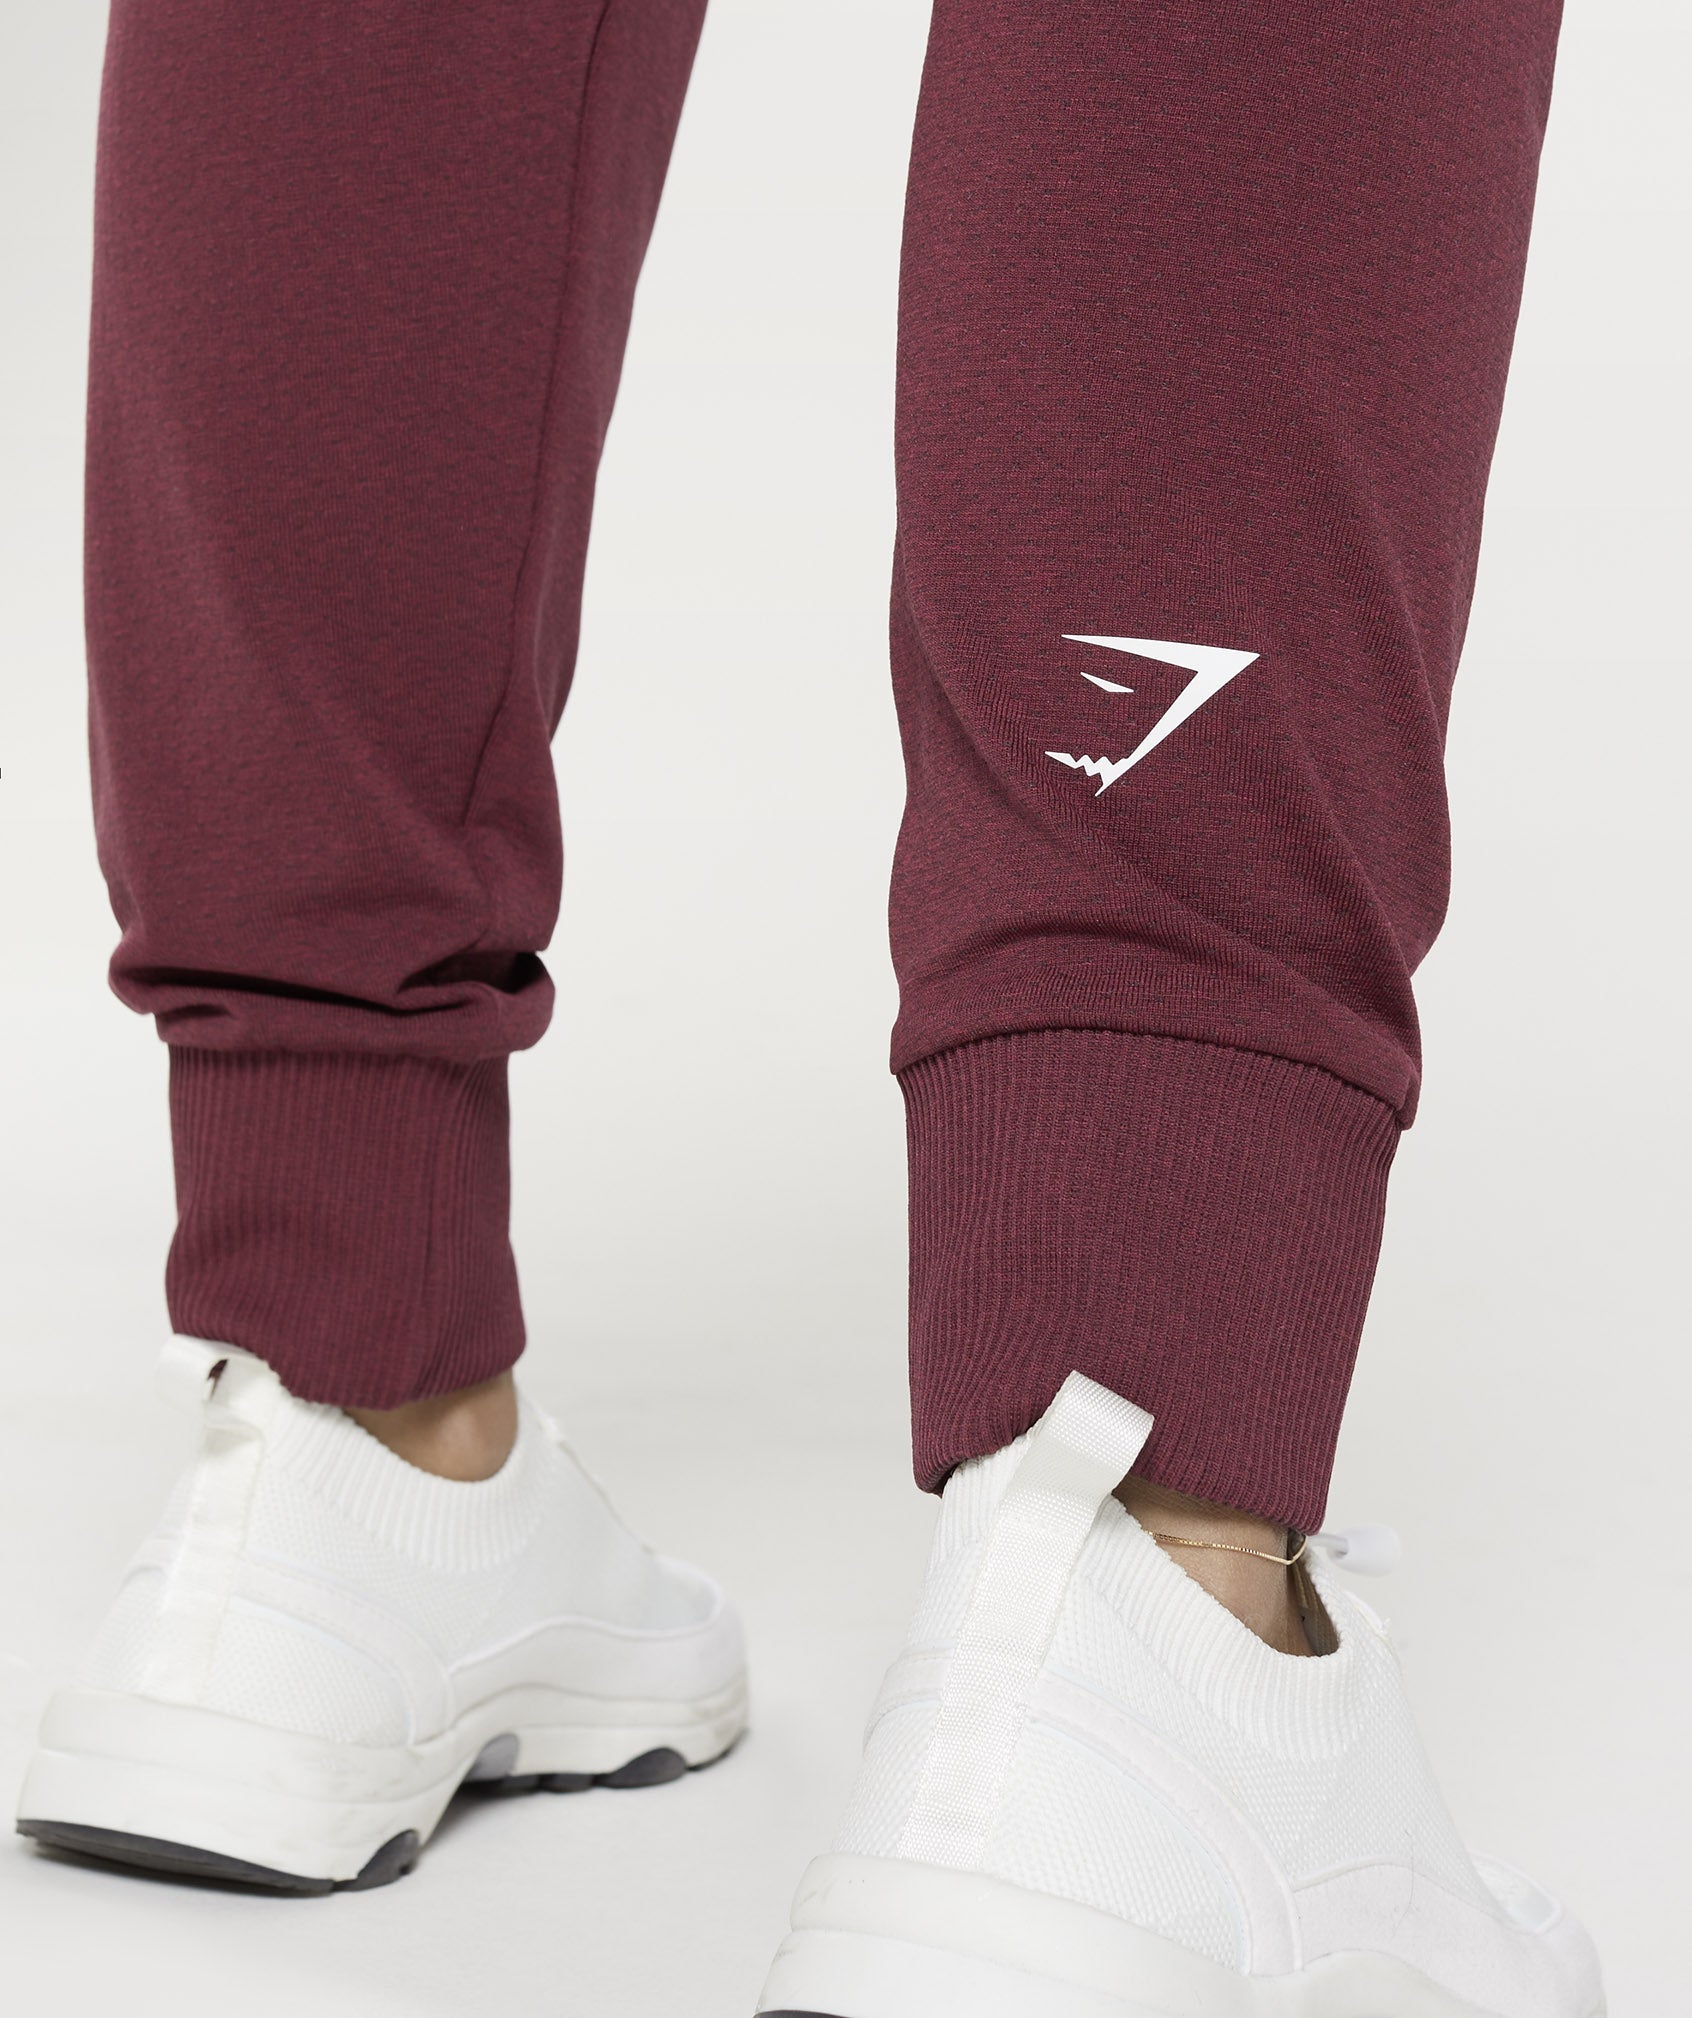 Vital Seamless 2.0 Joggers in Baked Maroon Marl - view 7